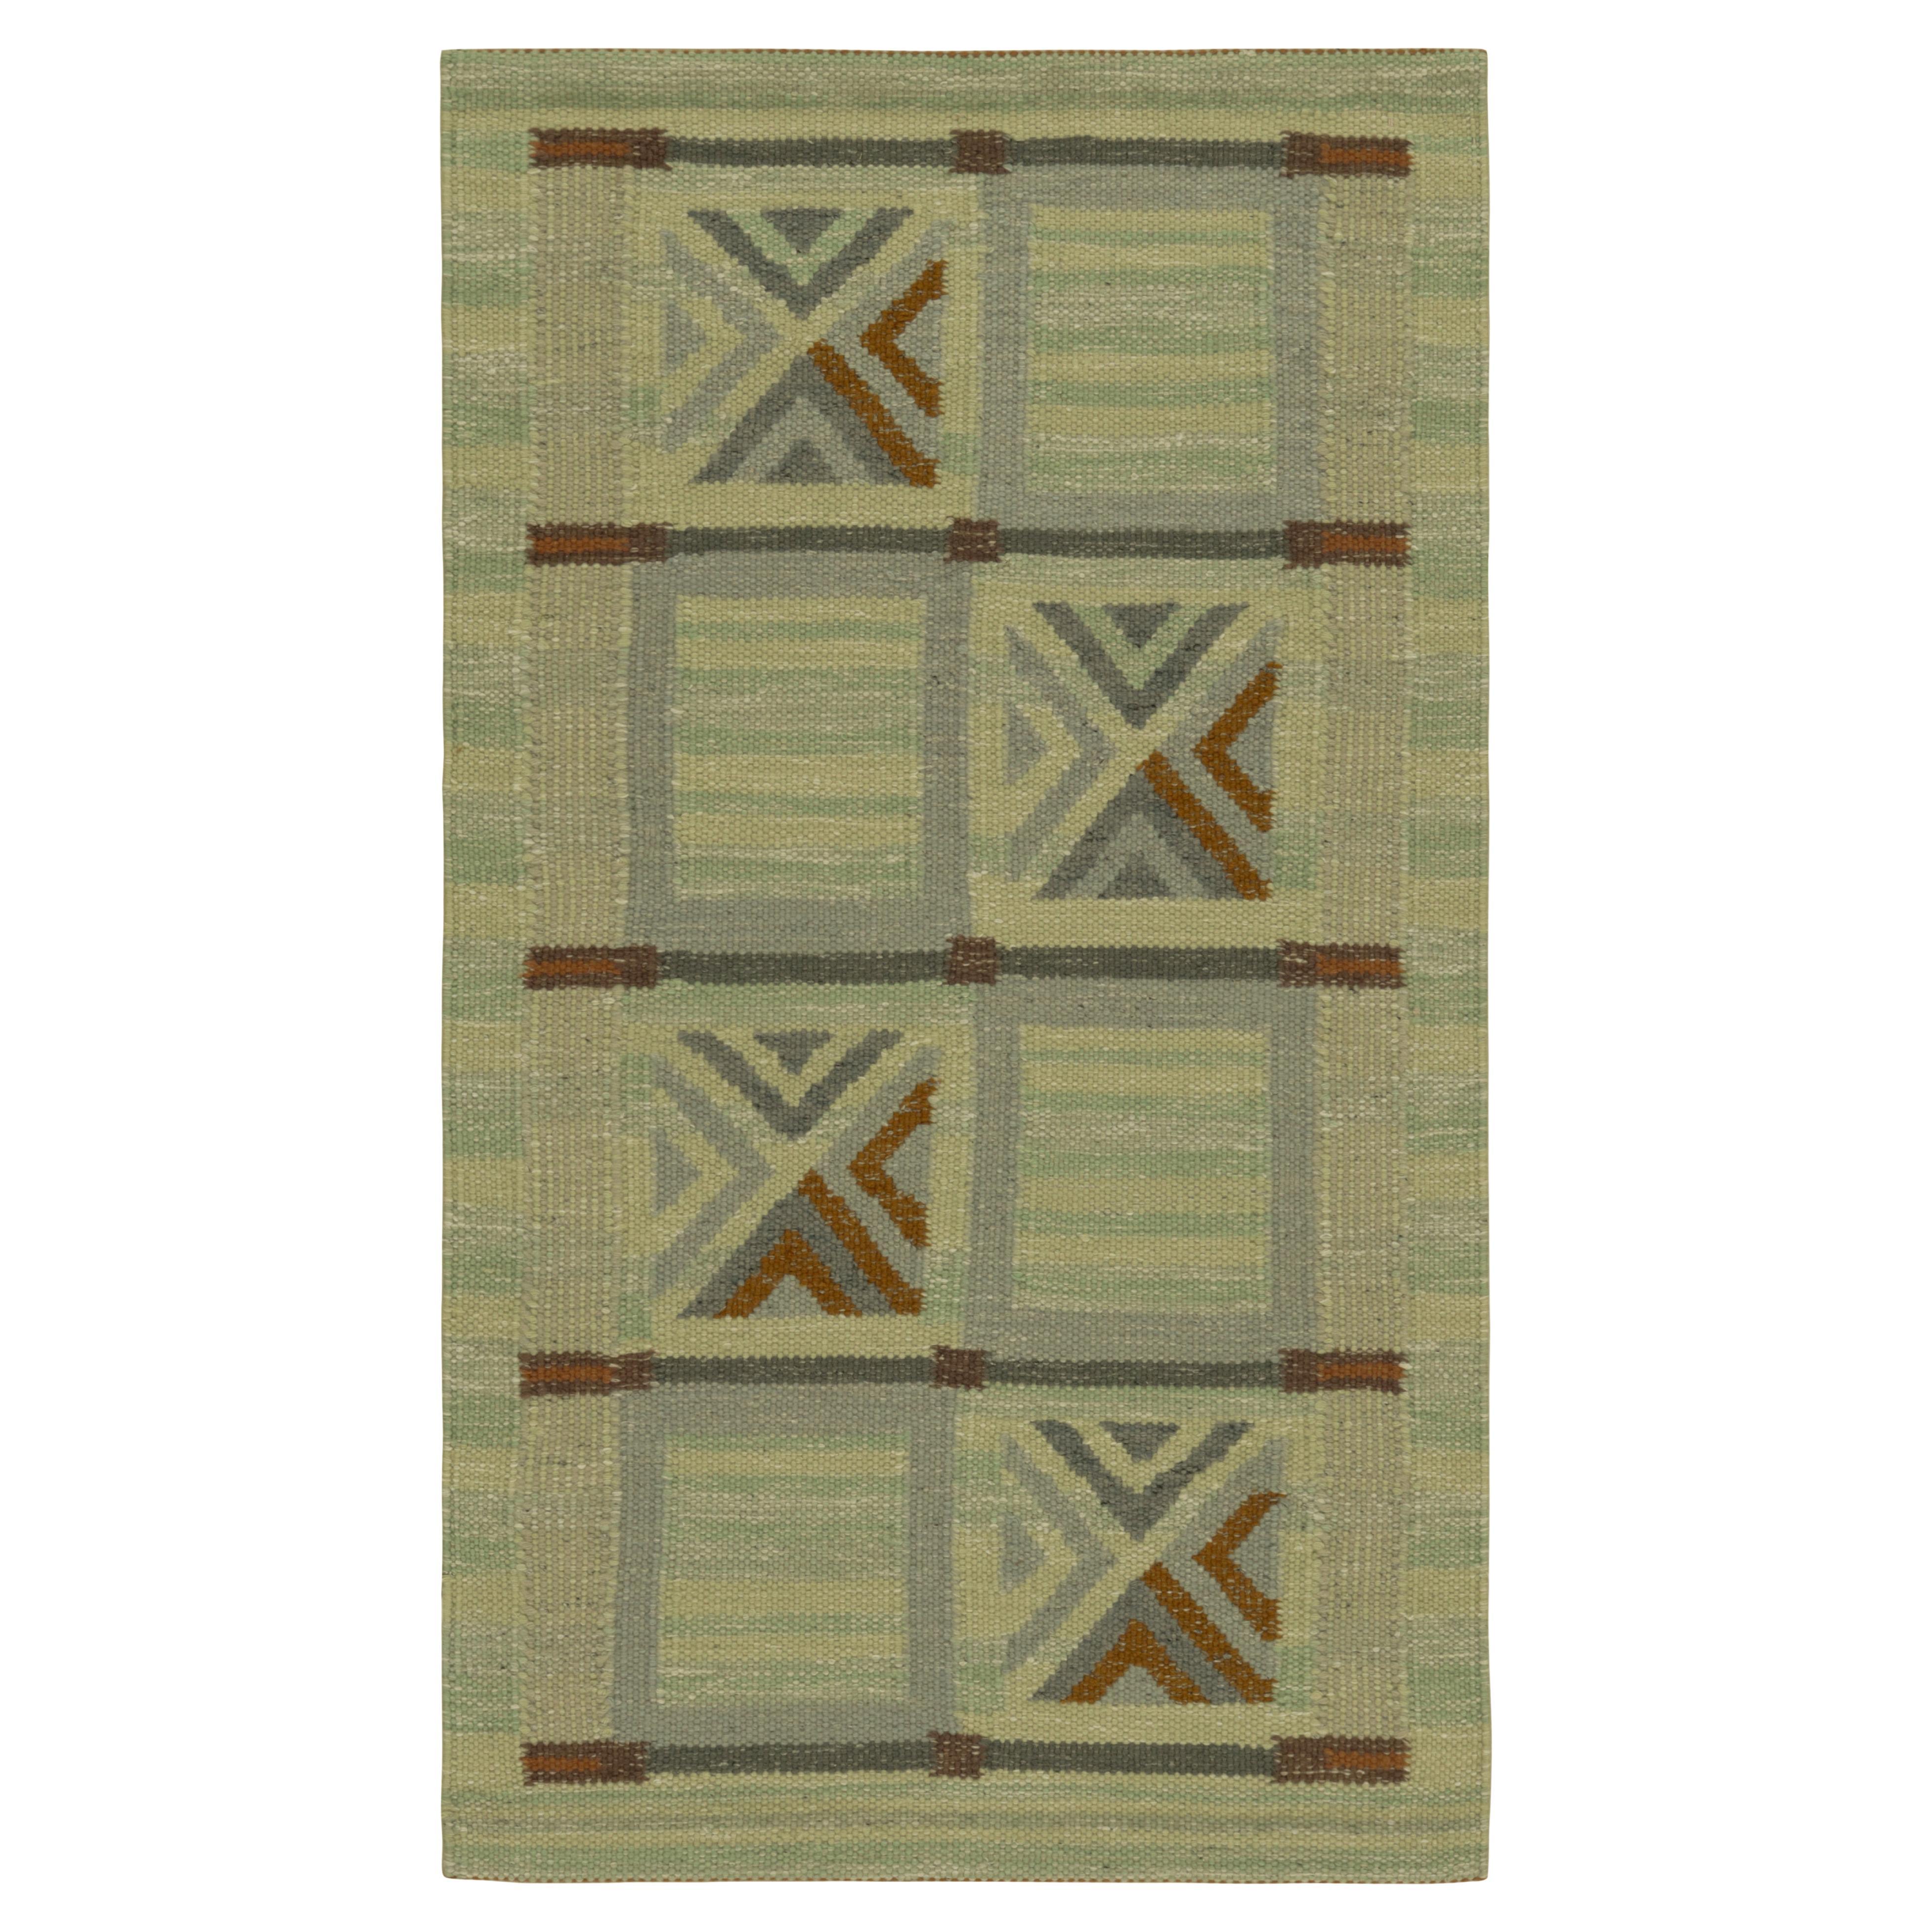 Rug & Kilim’s Scandinavian Style Rug in Blue Tones, with Geometric Patterns For Sale